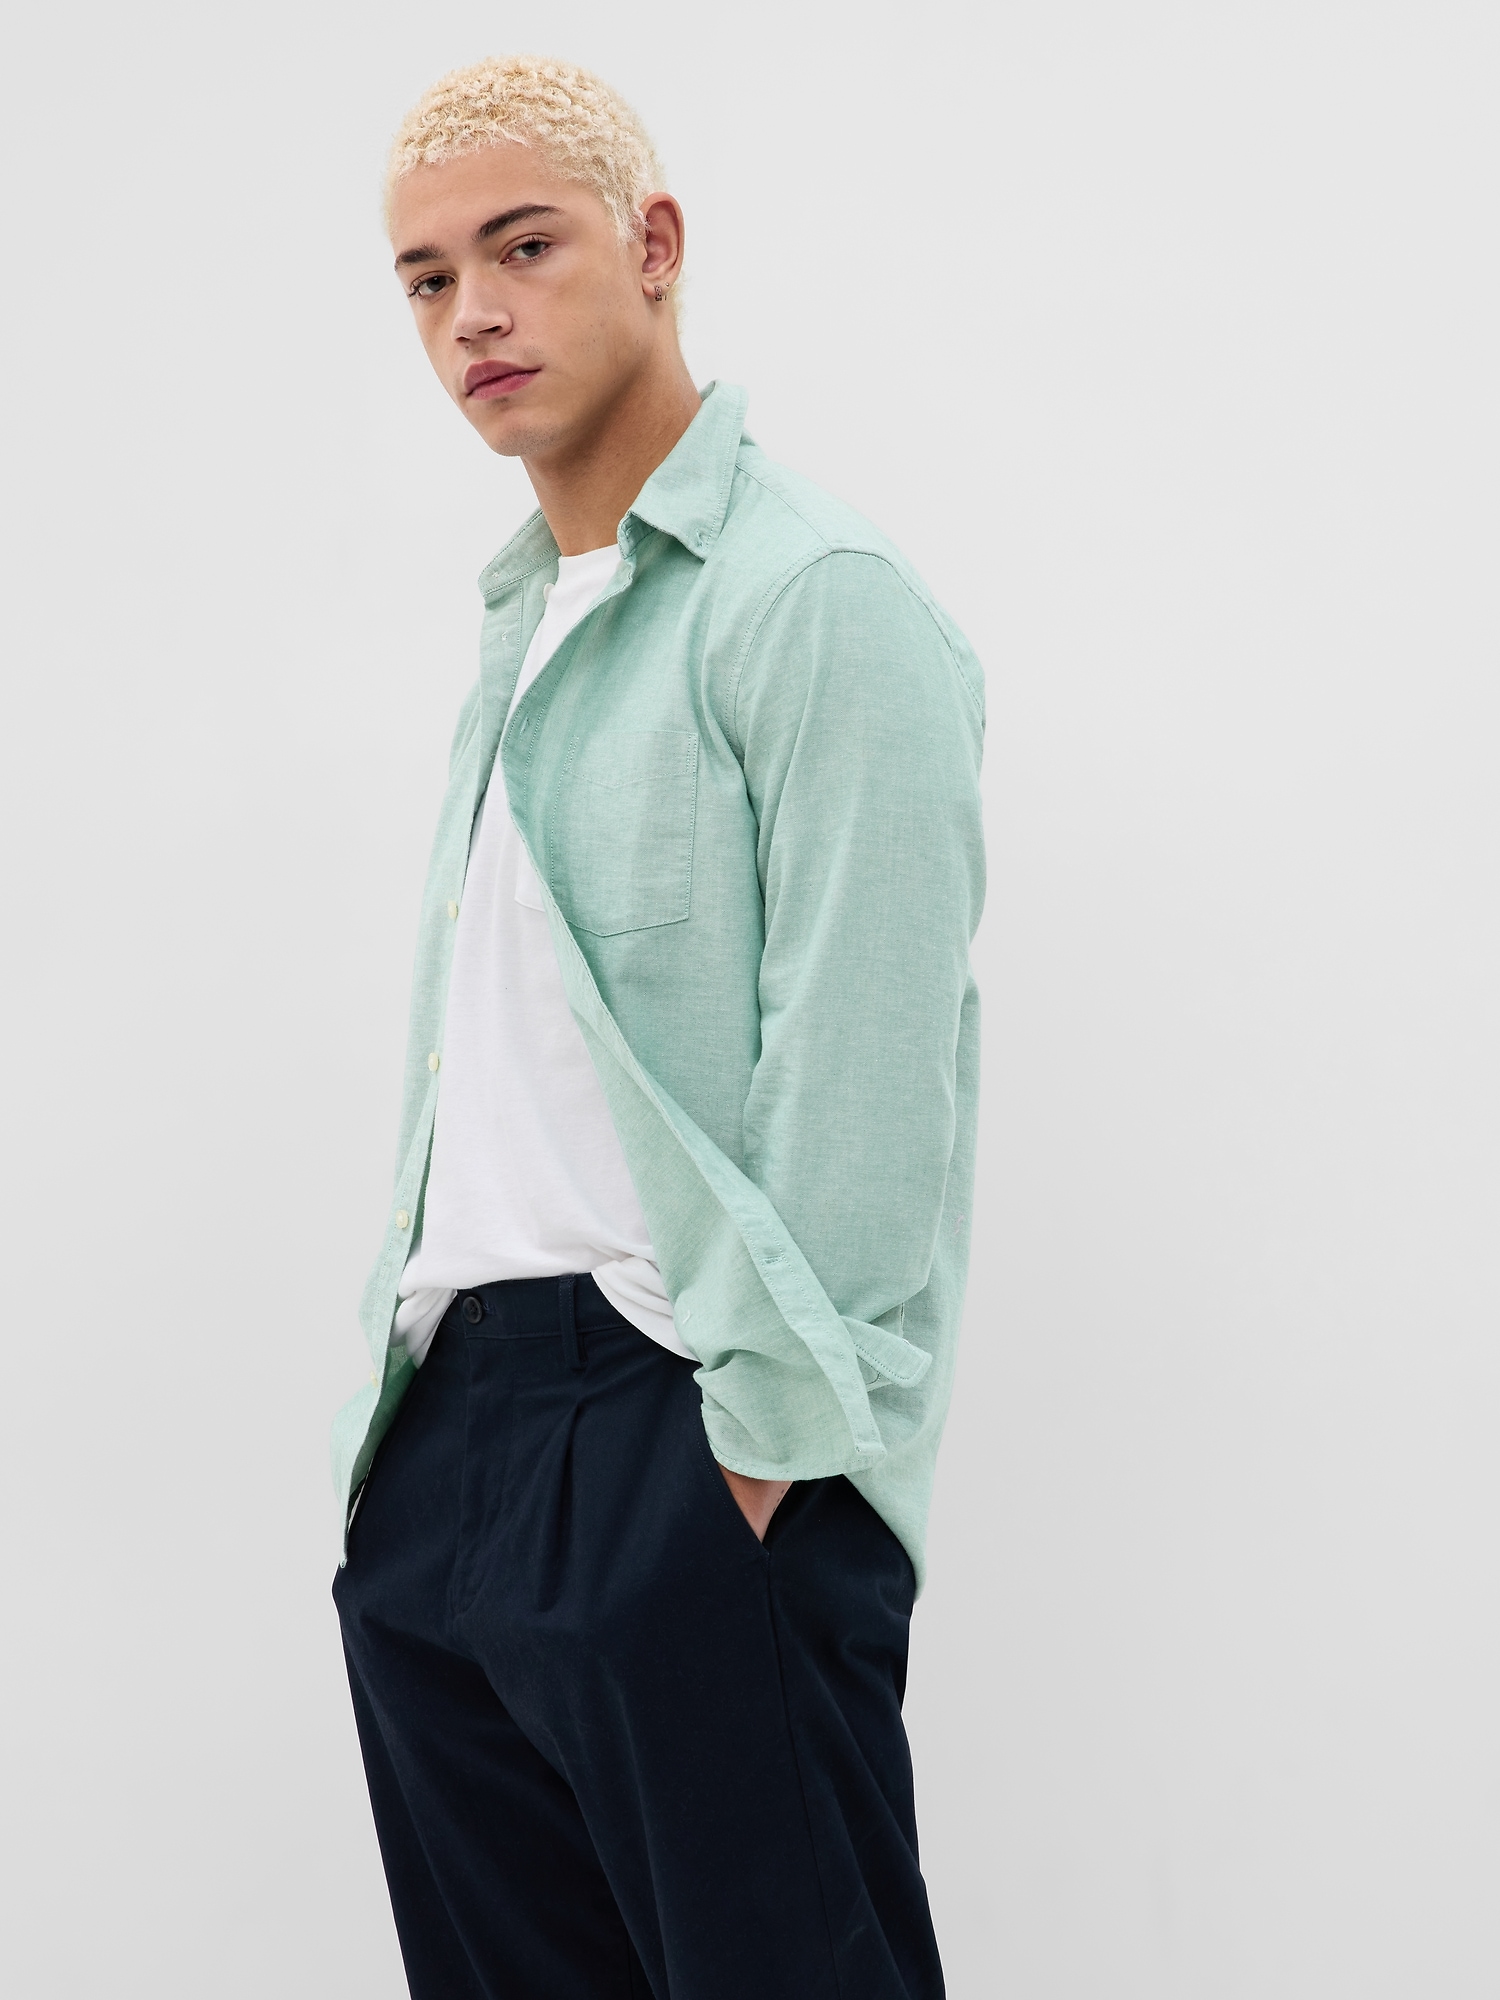 Classic Oxford Shirt in Standard Fit